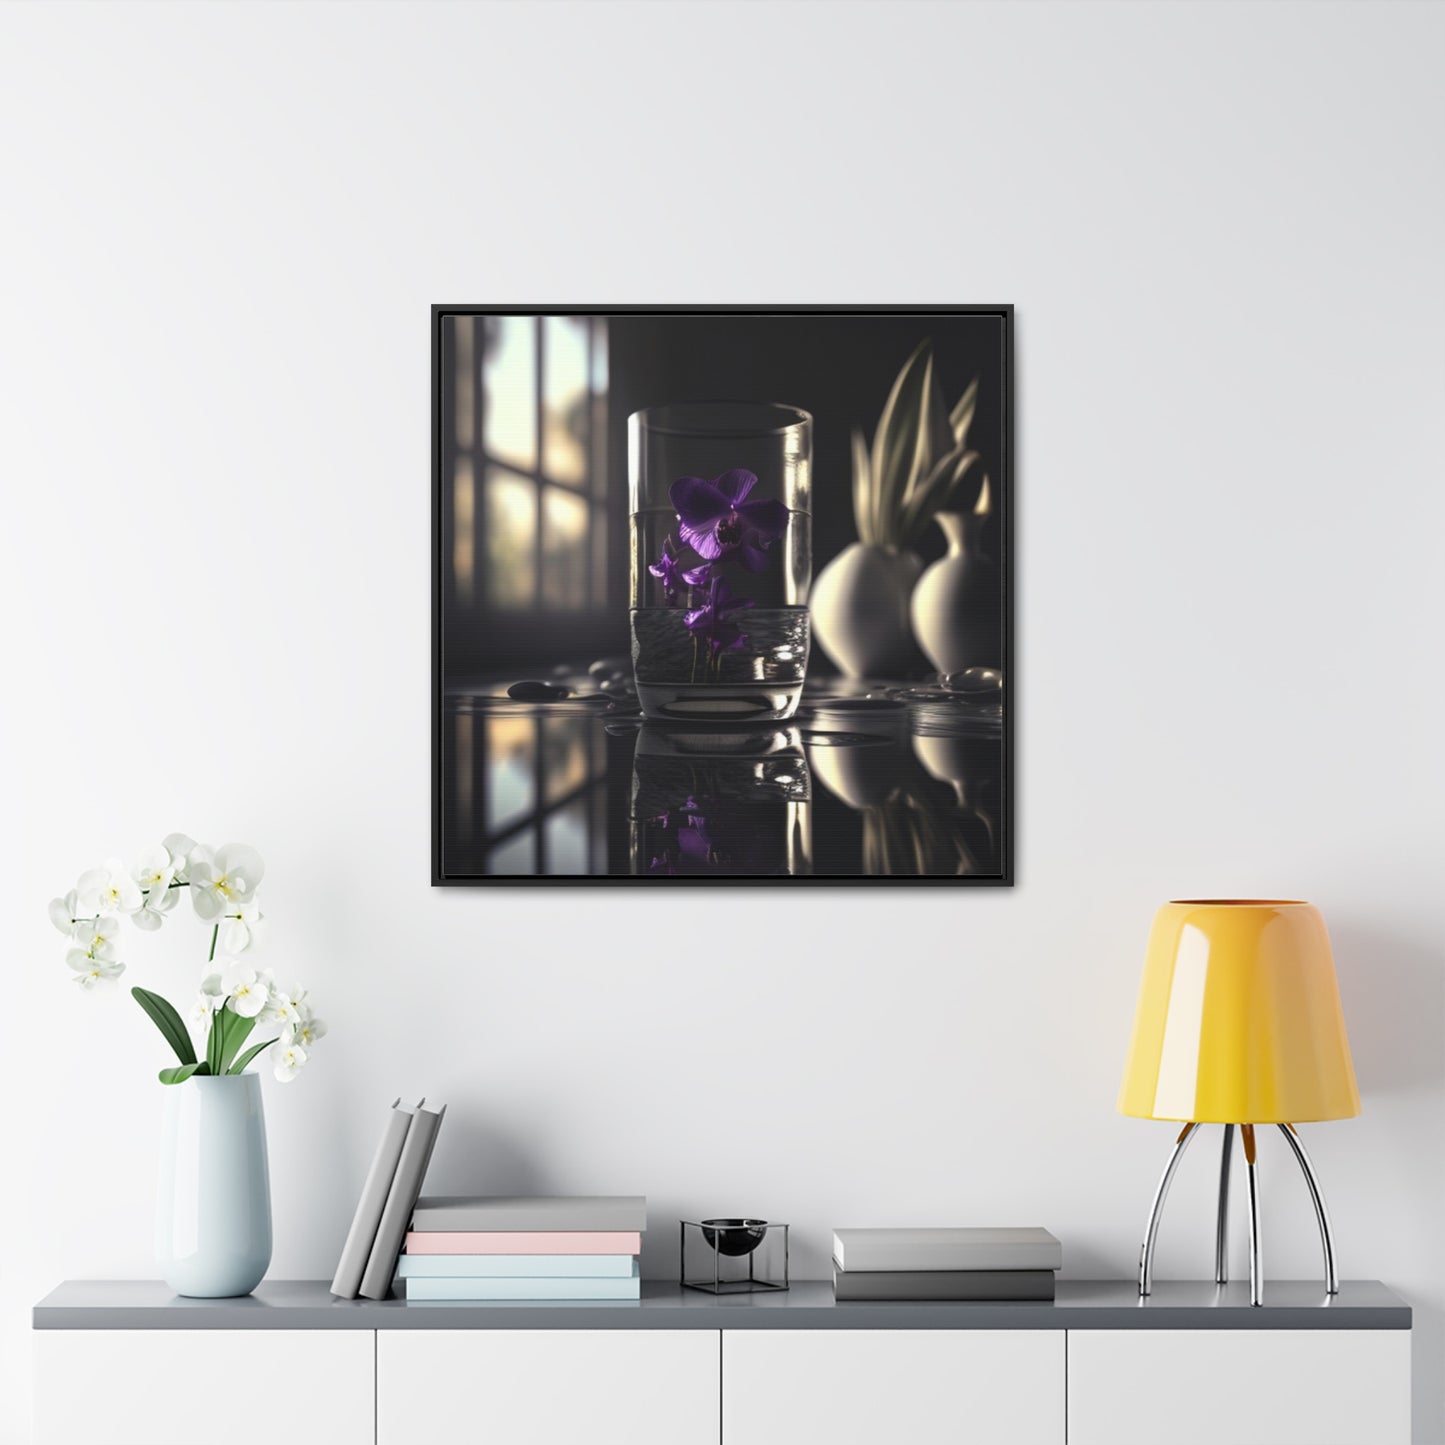 Gallery Canvas Wraps, Square Frame Purple Orchid Glass vase 4